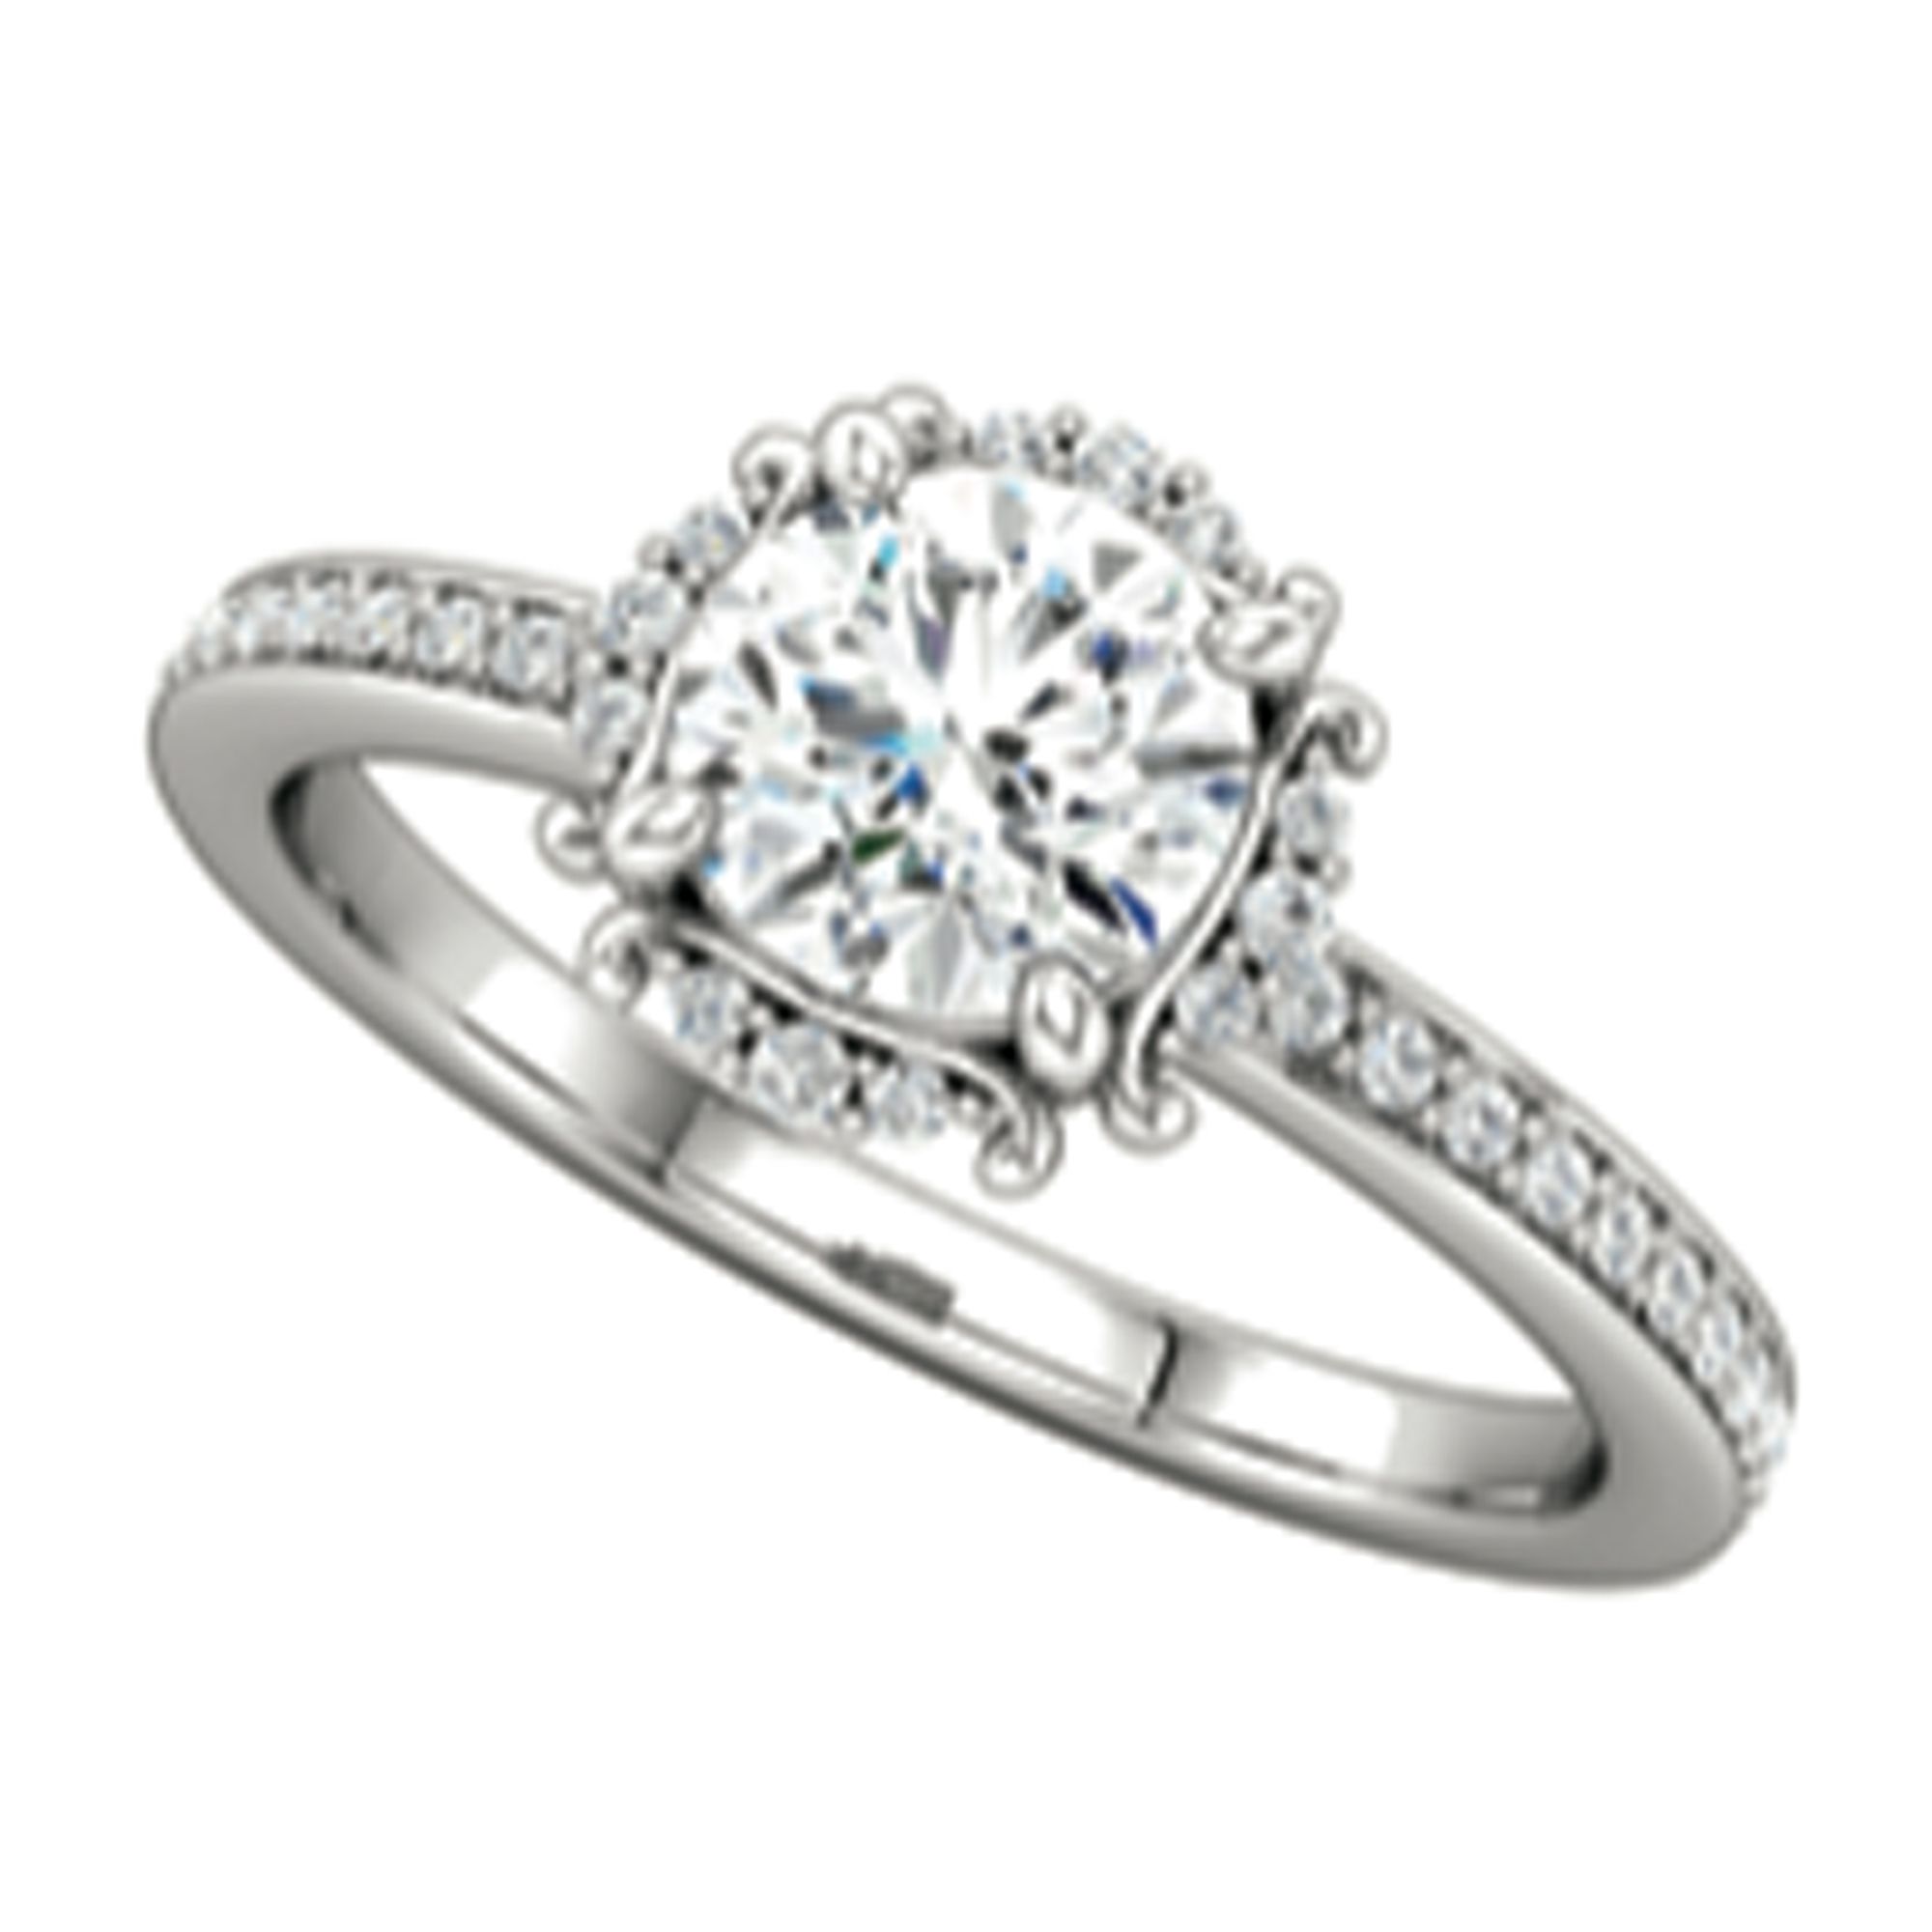 Sparkle Cut Diamonds – Scalloped Halo Engagement Ring | Platinum Pertaining To Best And Newest Square Sparkle Halo Rings (View 23 of 25)